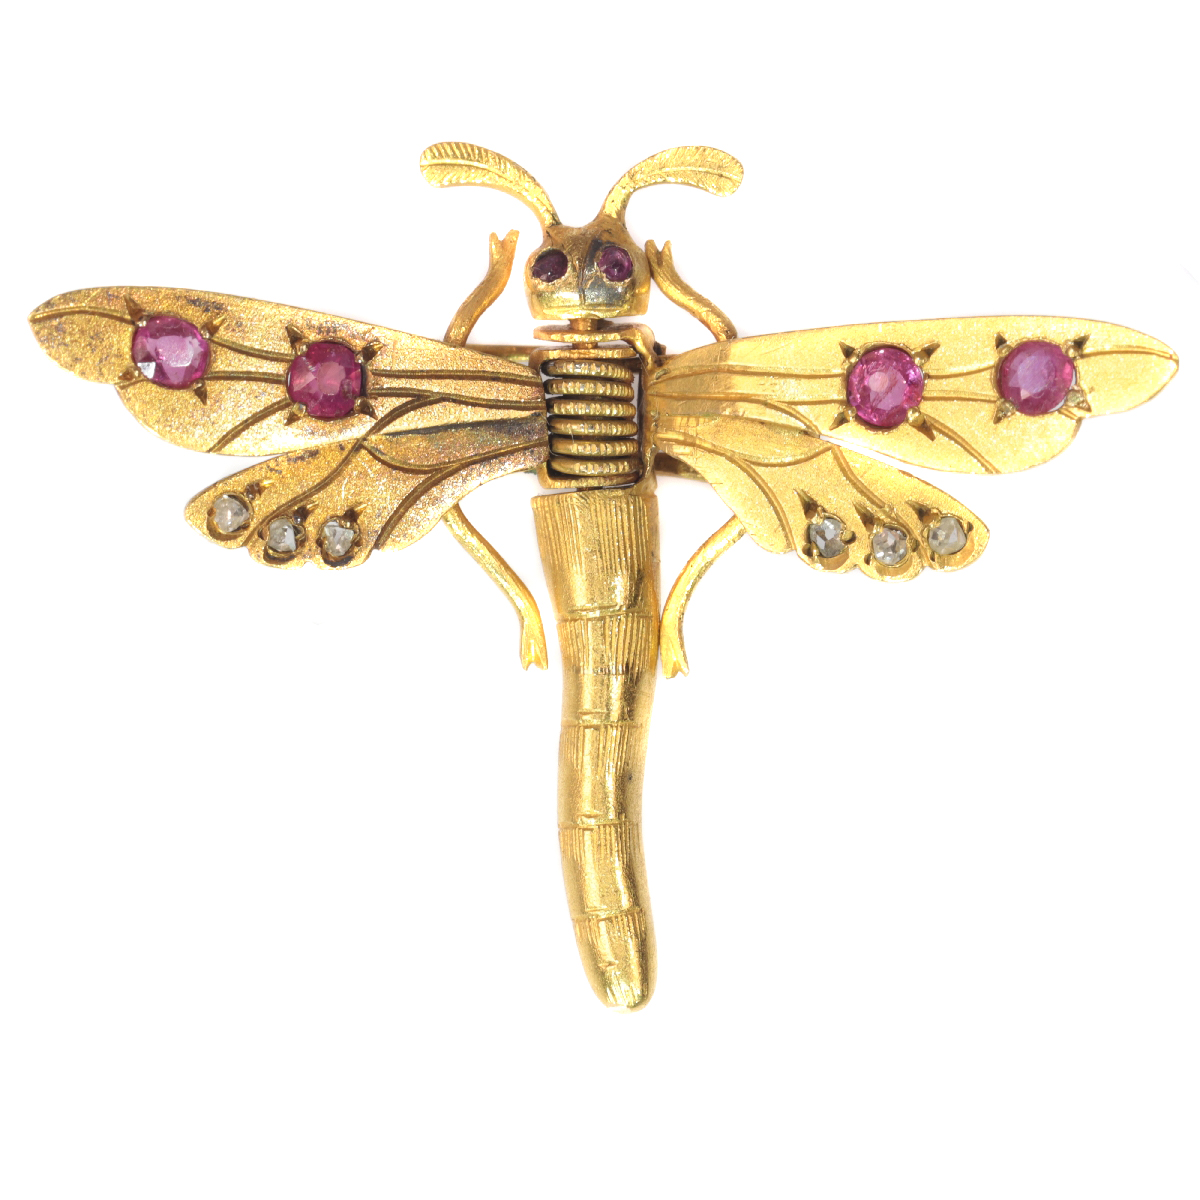 Vintage Chic: The Dragonfly Brooch or Hair Clip of Victorian Fashion